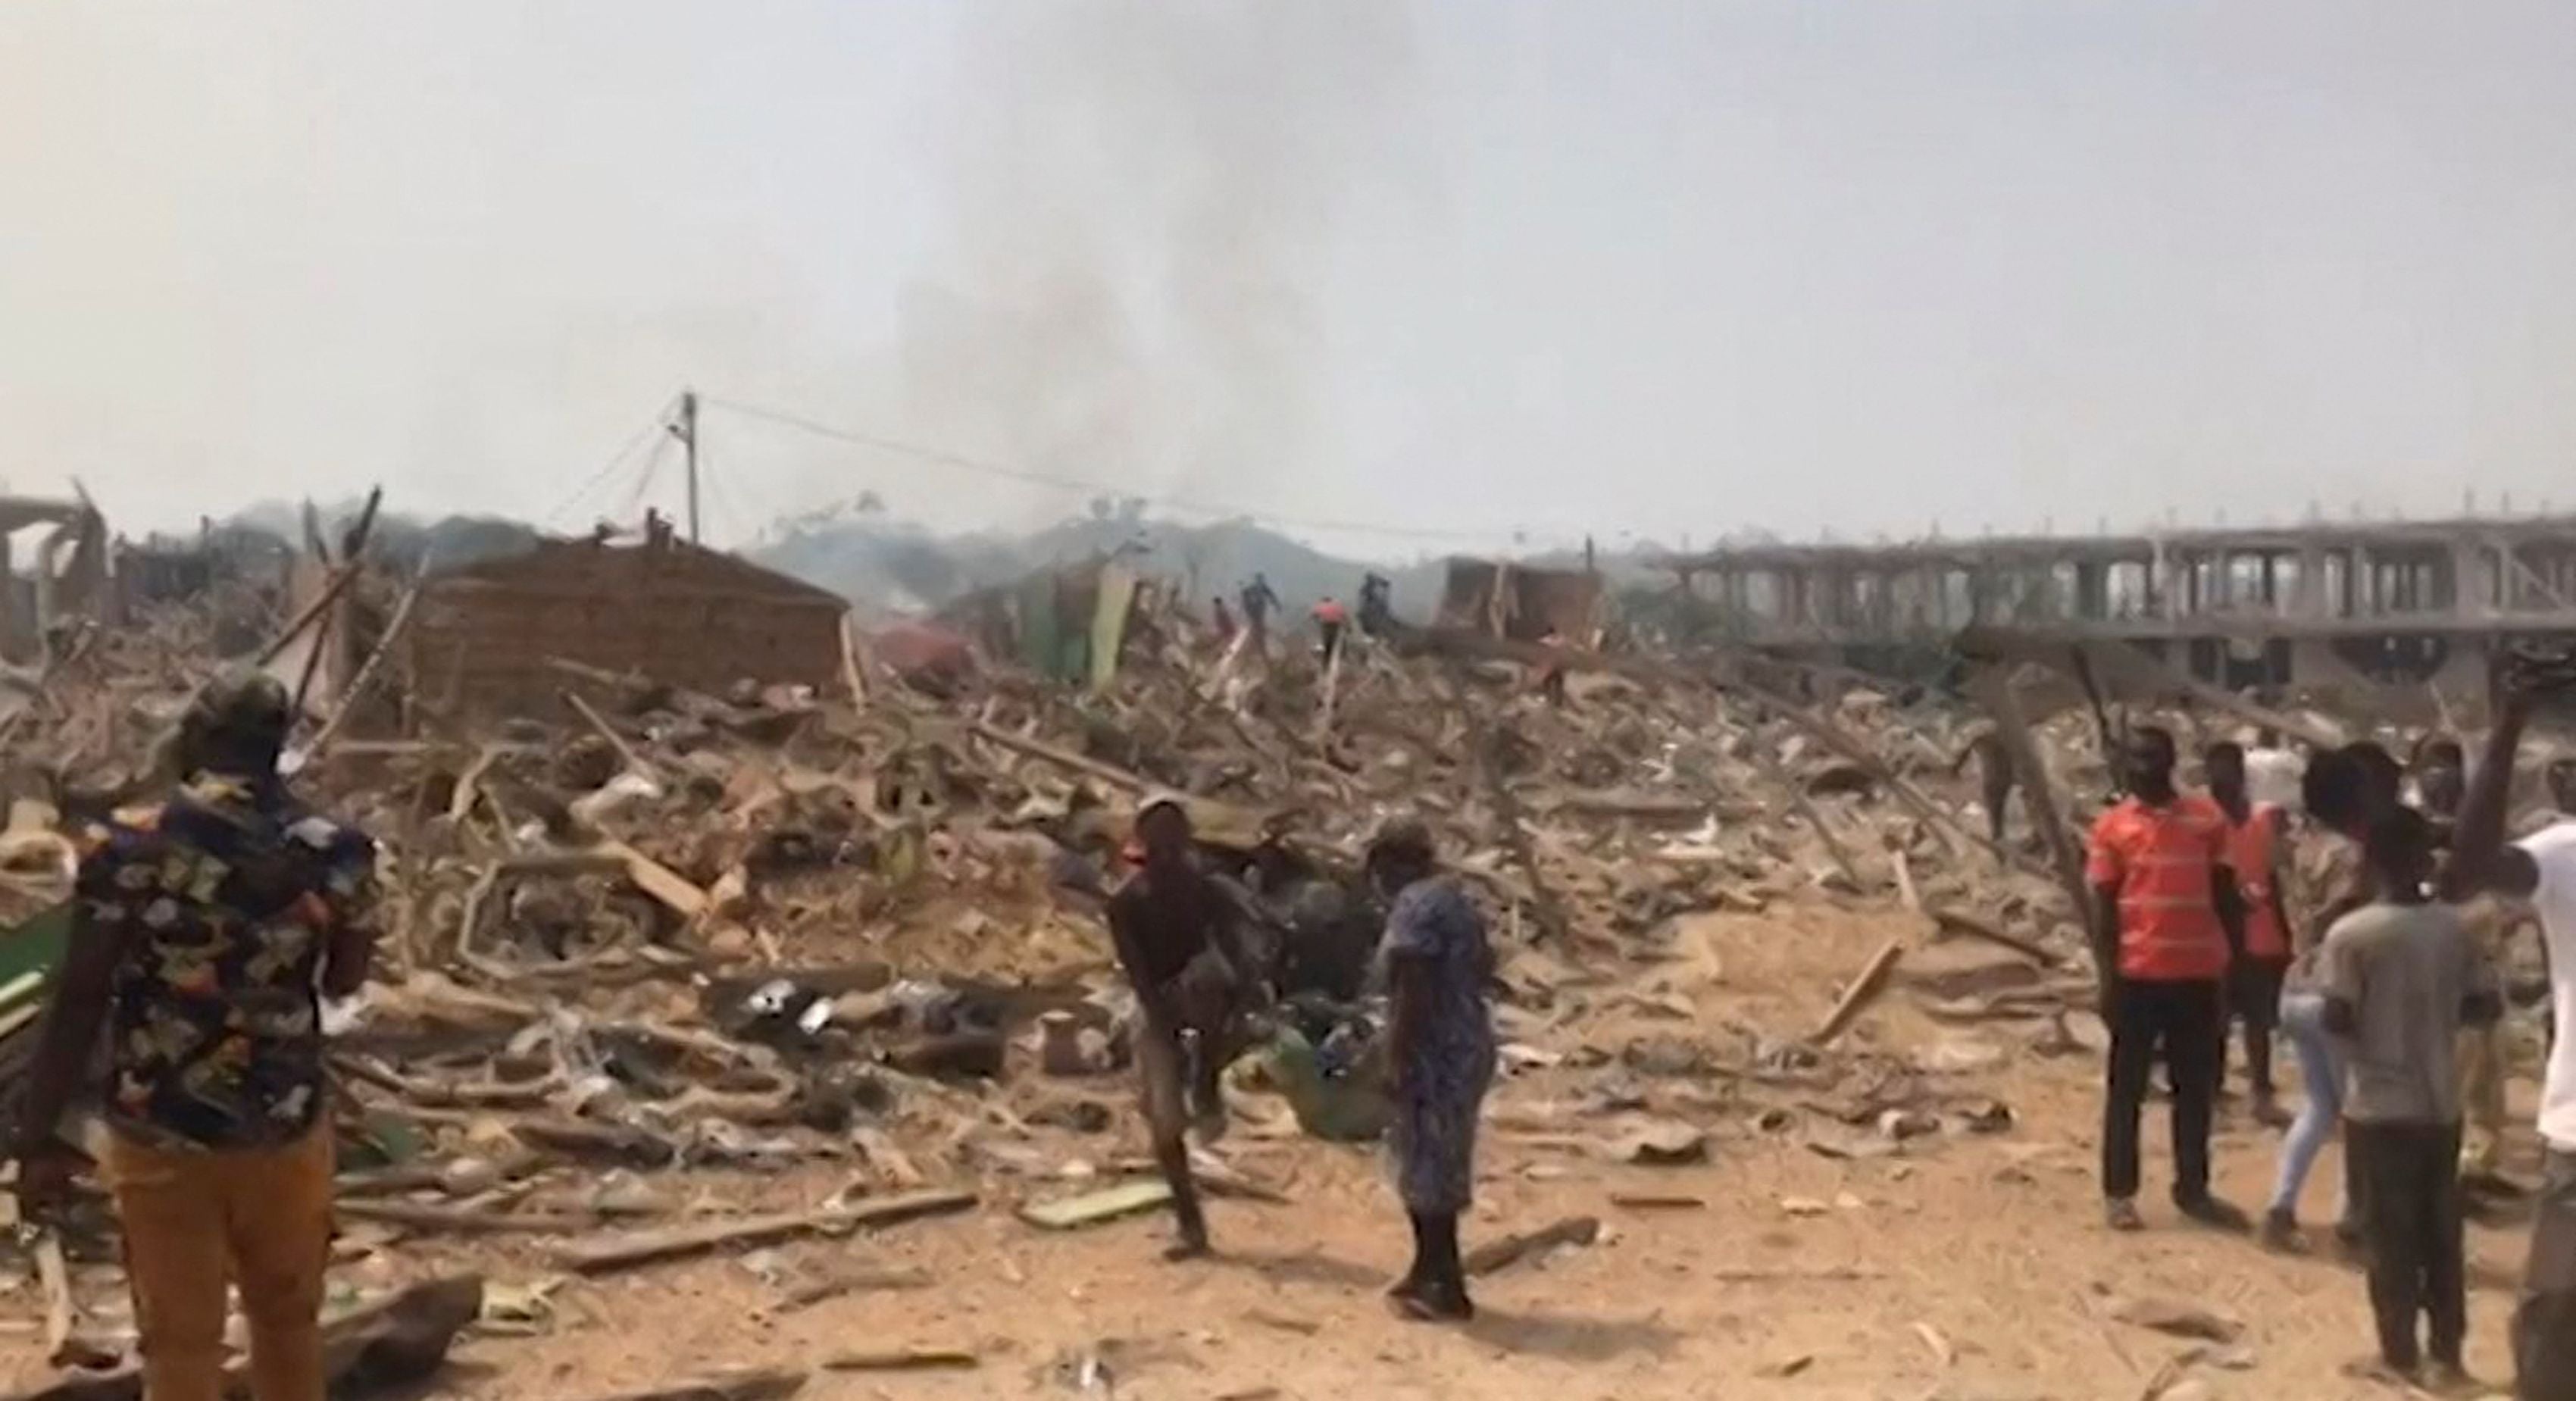 The aftermath of an explosion in the village of Apiate, which has killed at least 17 people